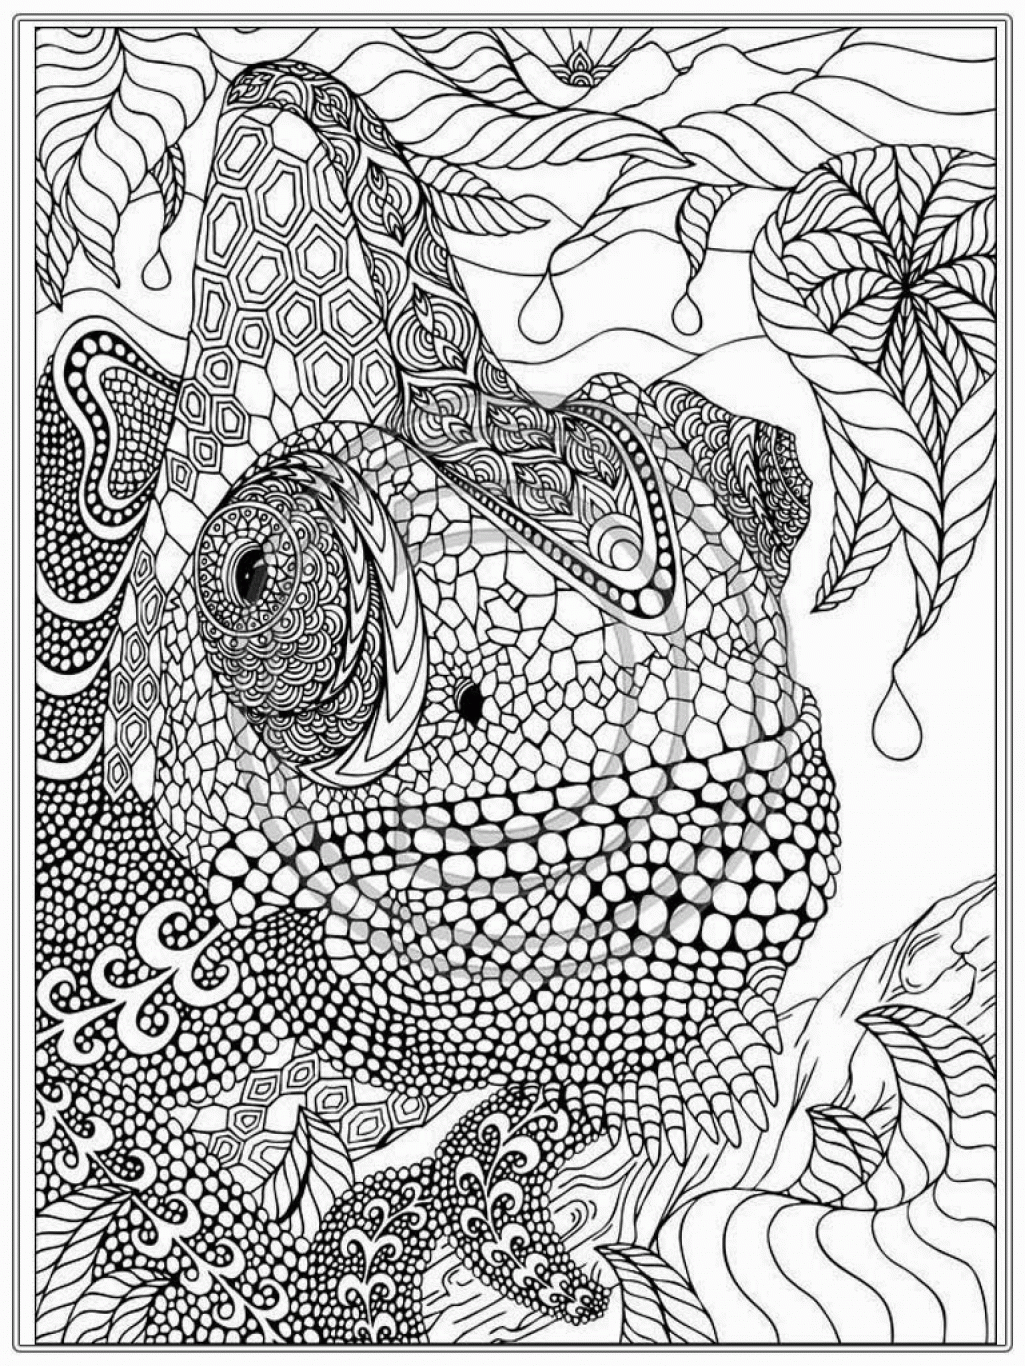 Free Online Adult Coloring Pages - Coloring Home